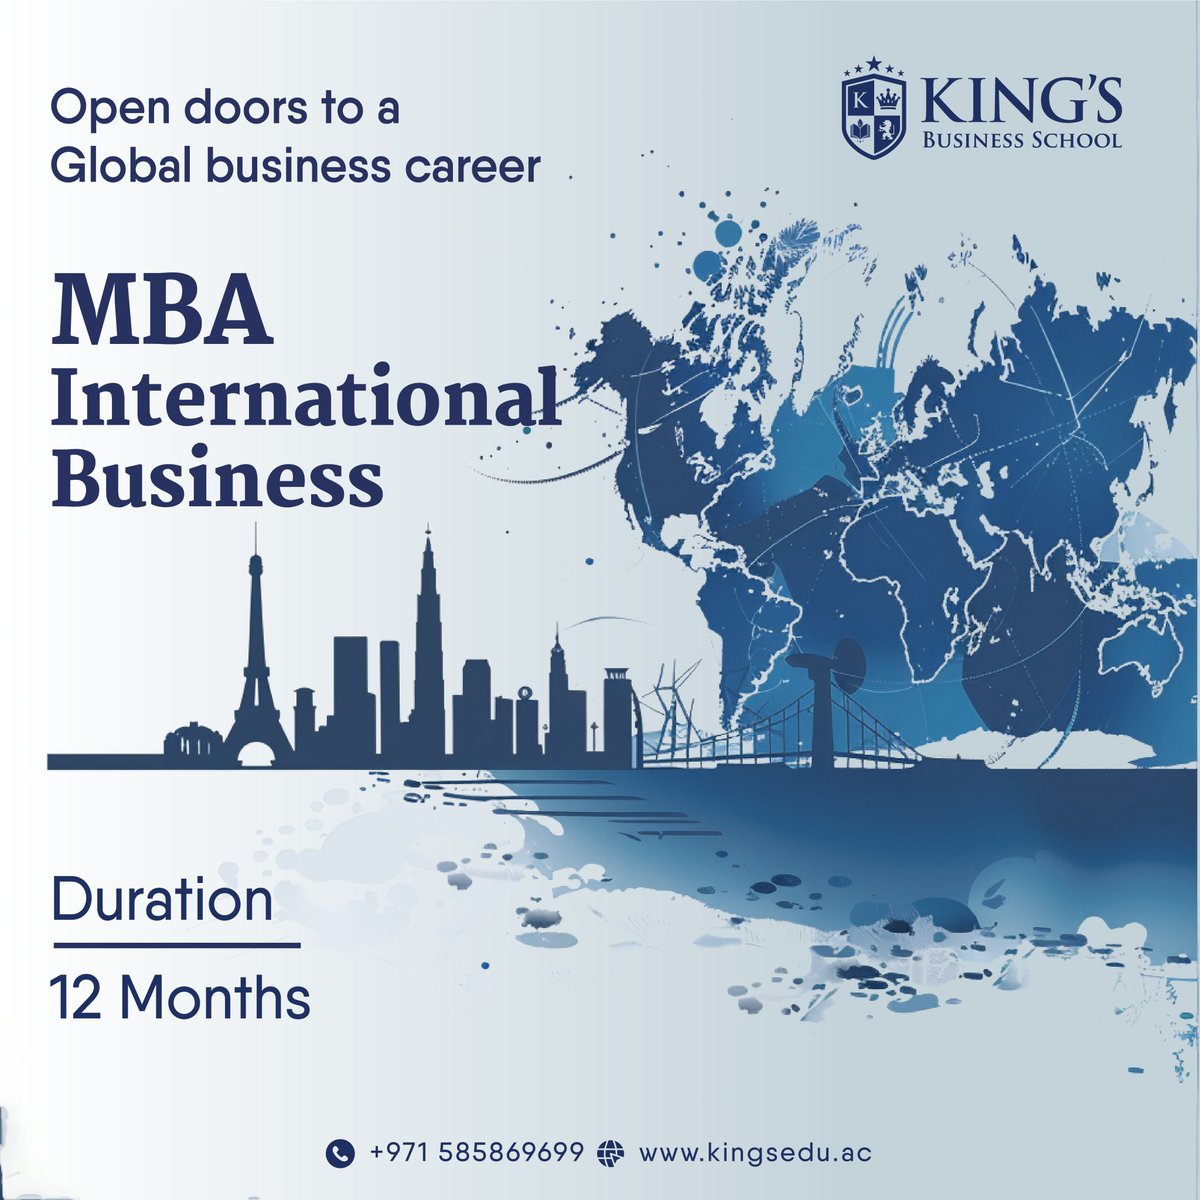 What does an MBA in International Business open doors to?

To know more, contact us: 00971585869699
.
.
#MBAInternationalBusiness #GlobalBusinessOpportunities #MBA #MBAPrograms #EMBACourses #kingsbusinessschool #KingsBSchool